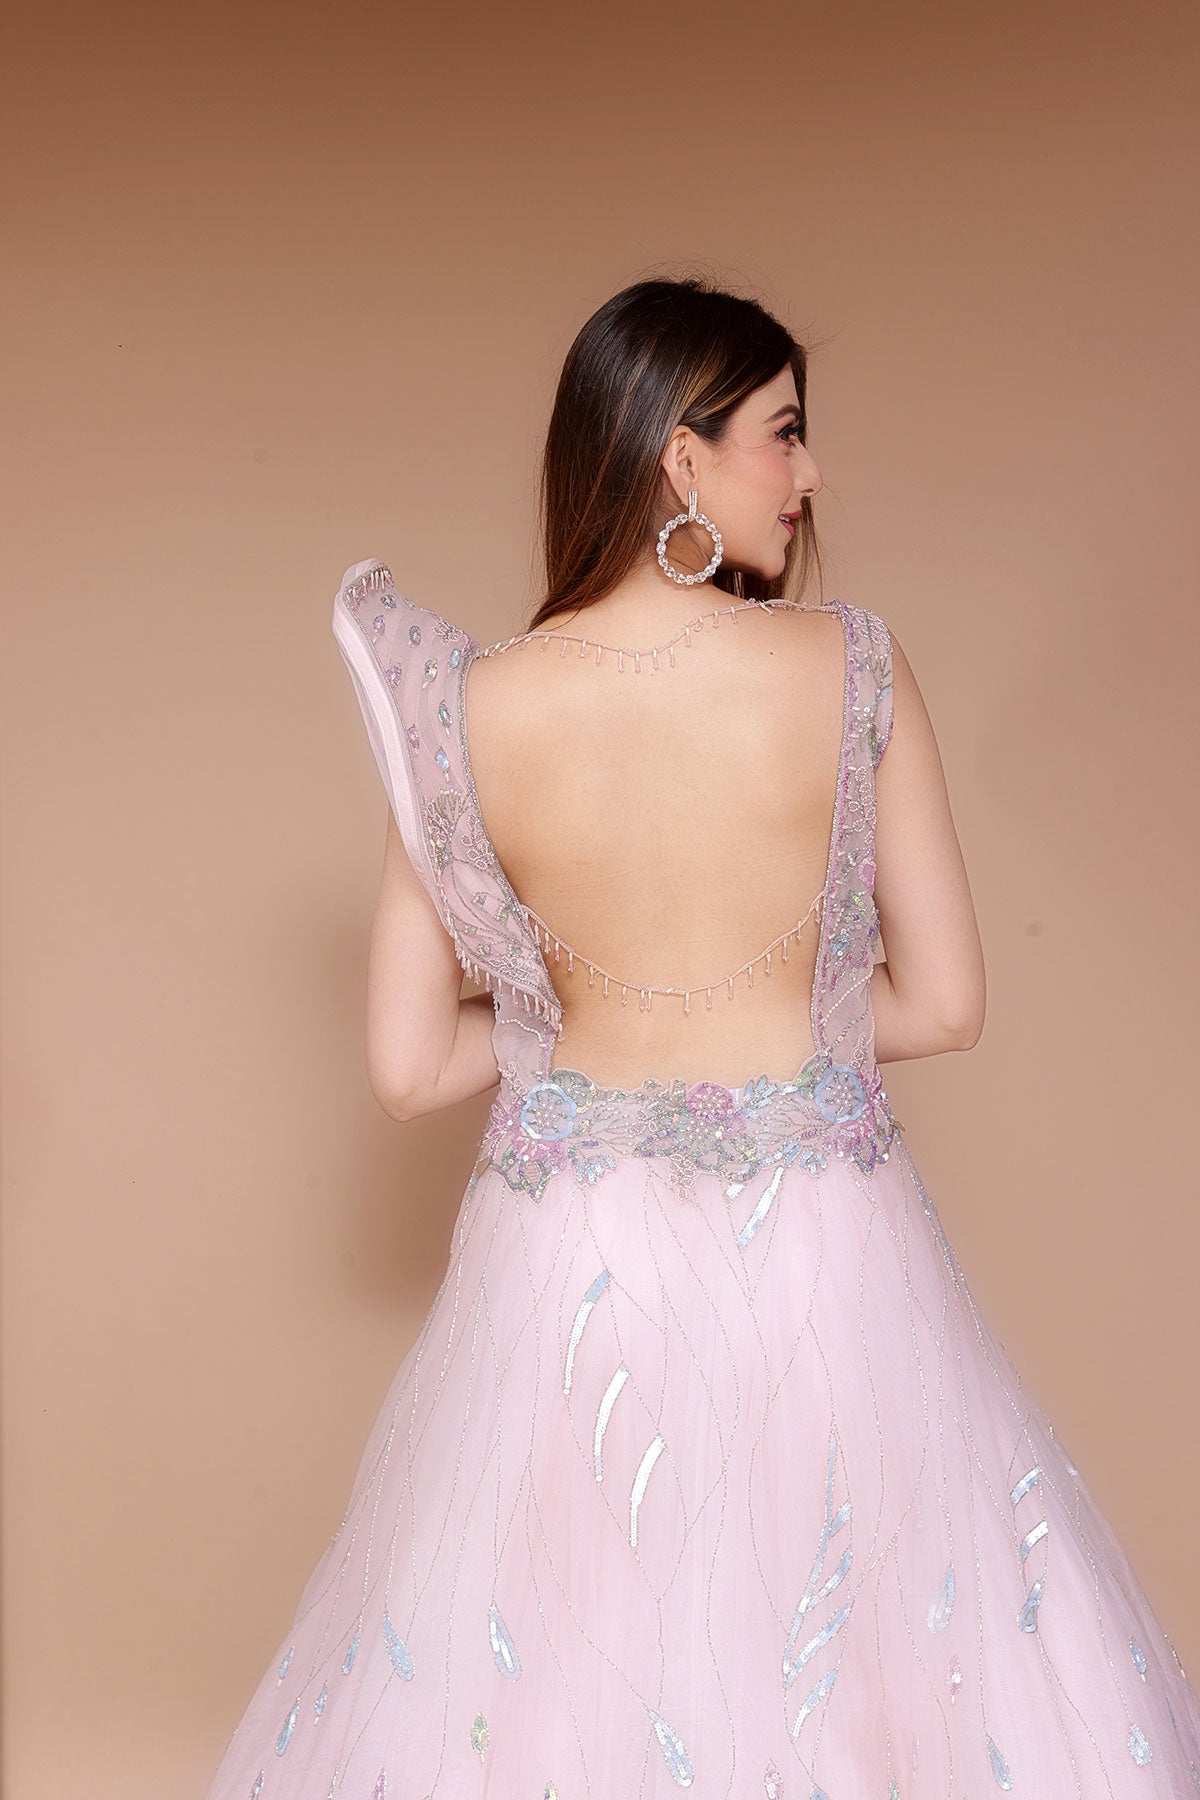 Baby Pink Gown in Net embellished with hand embroidery on yolk along with cape sleeve